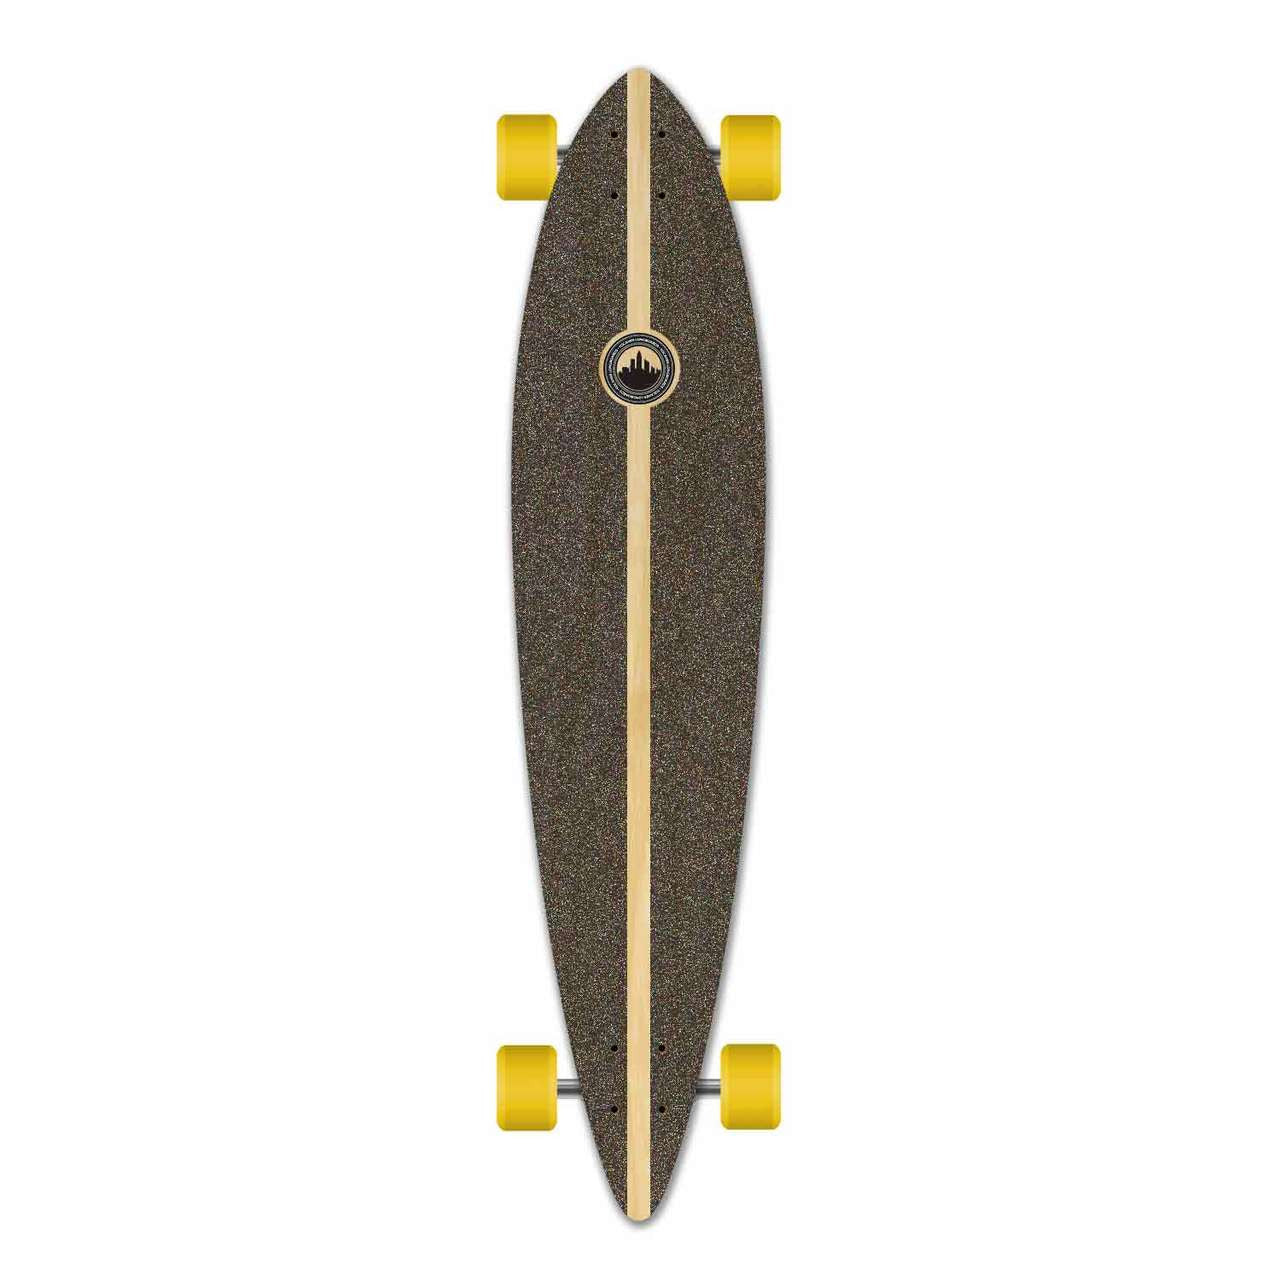 Yocaher Pintail Longboard Complete - Tropical Day